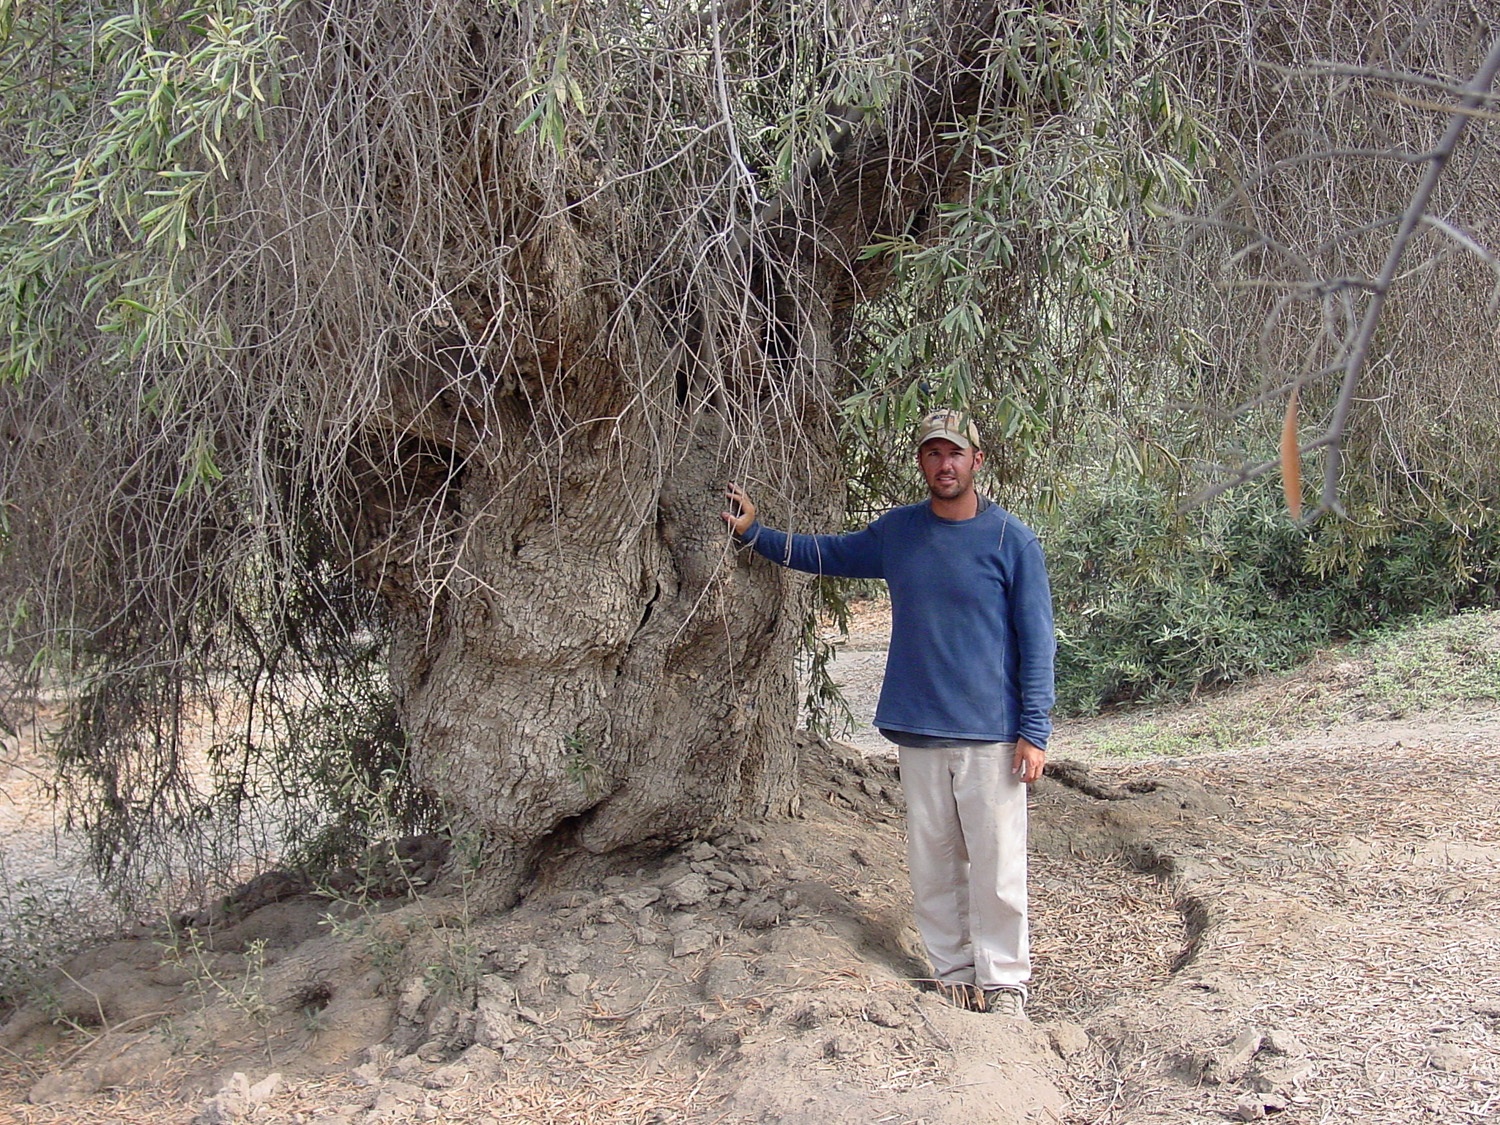 Figure 3: A centuries-old olive tree in the study area—a focus of Spanish colonial farming (A.D. 1532-1821).